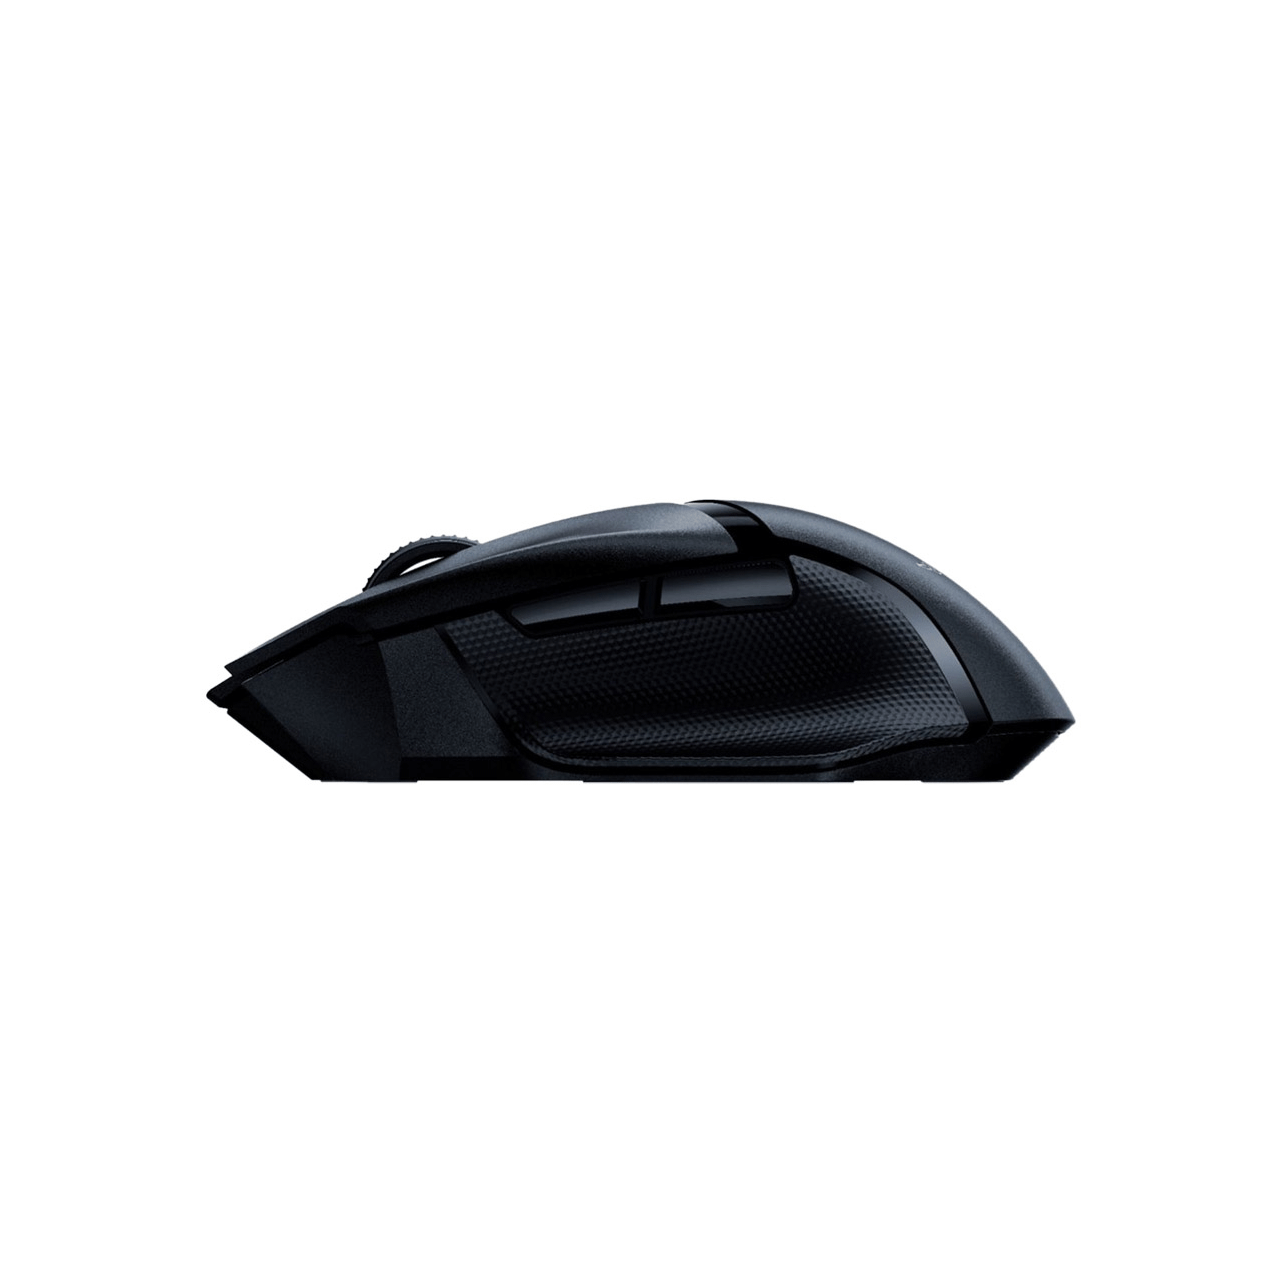 BASILISK-X---HYPERSPEED----Wireless-Gaming-Mouse